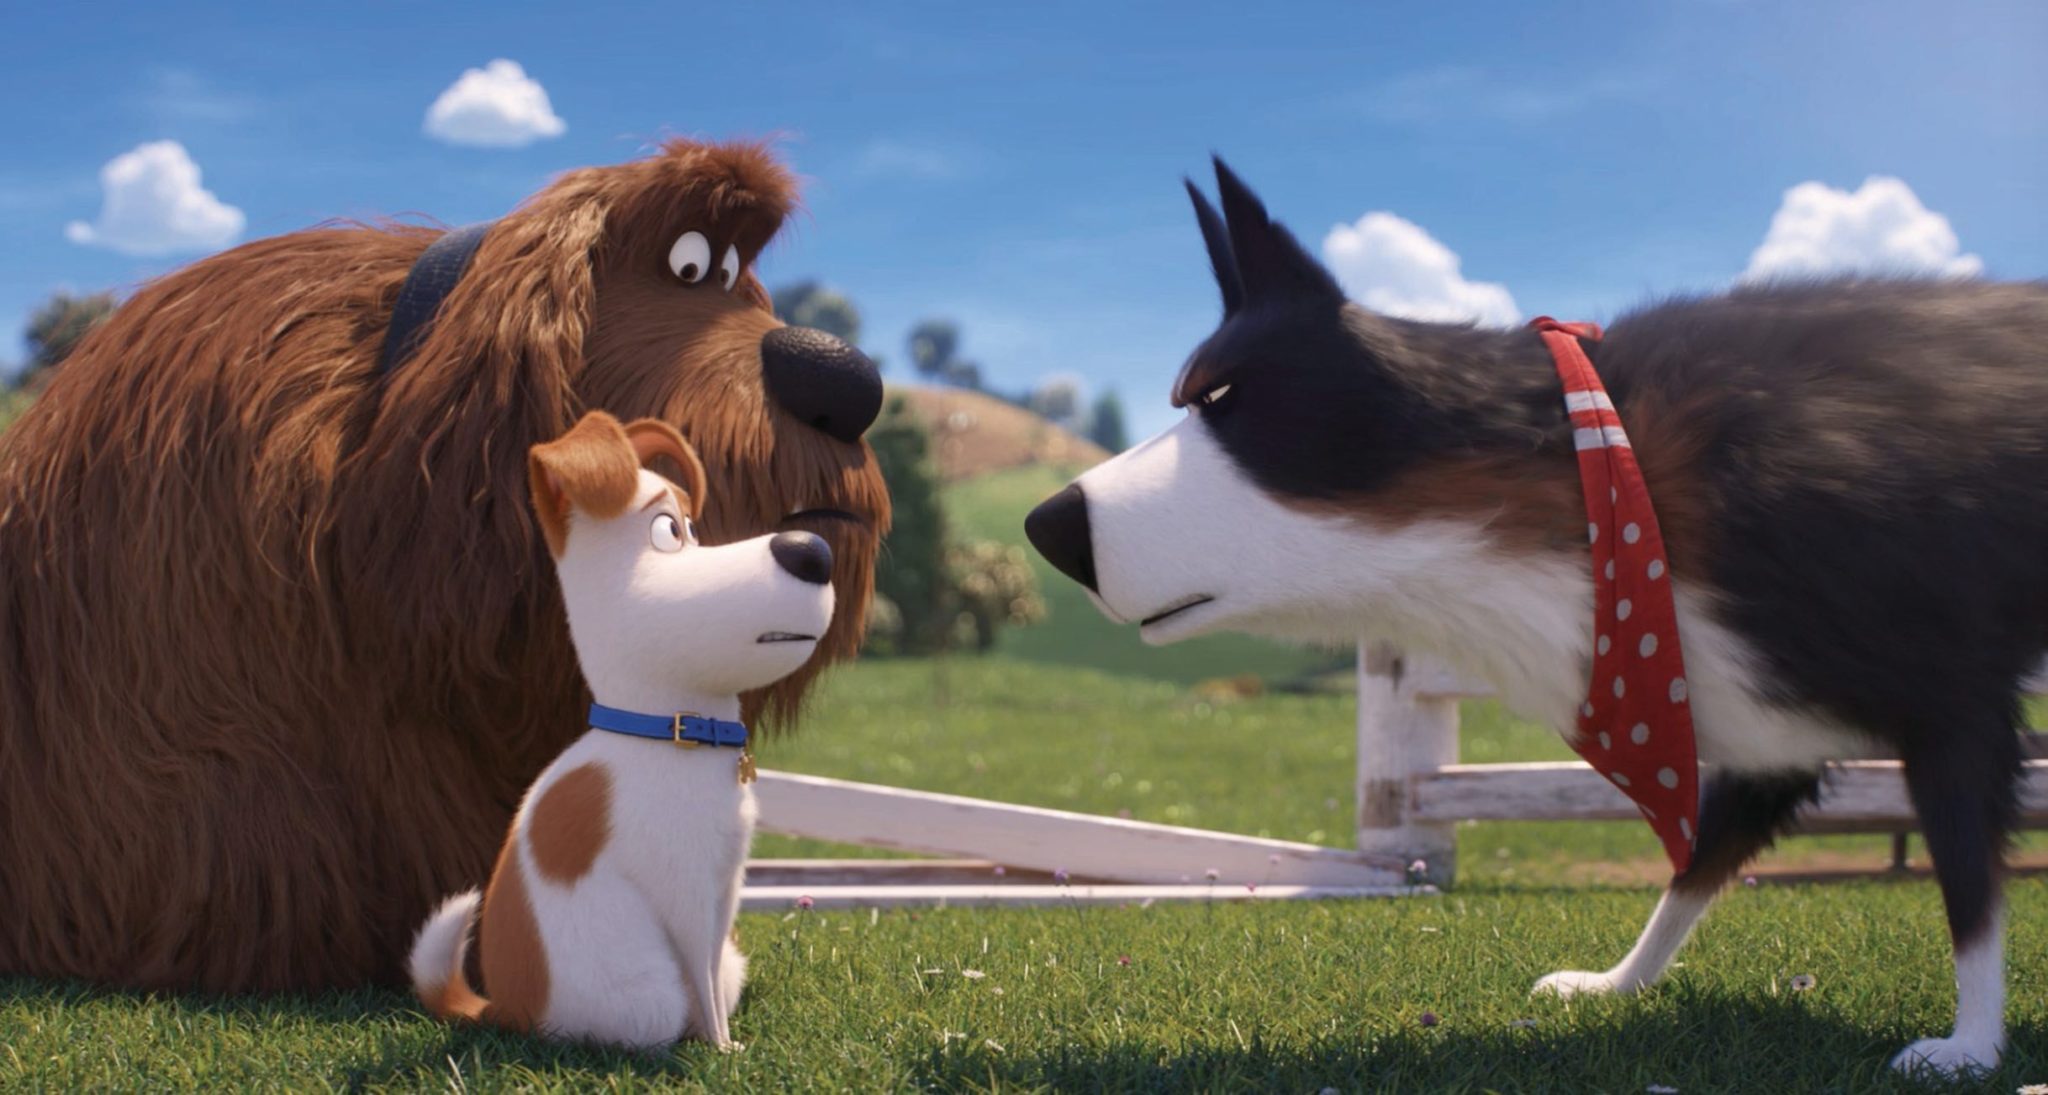 EXPIRED: Amazon’s $2.99 Rental This Weekend Is ‘The Secret Life of Pets 2’